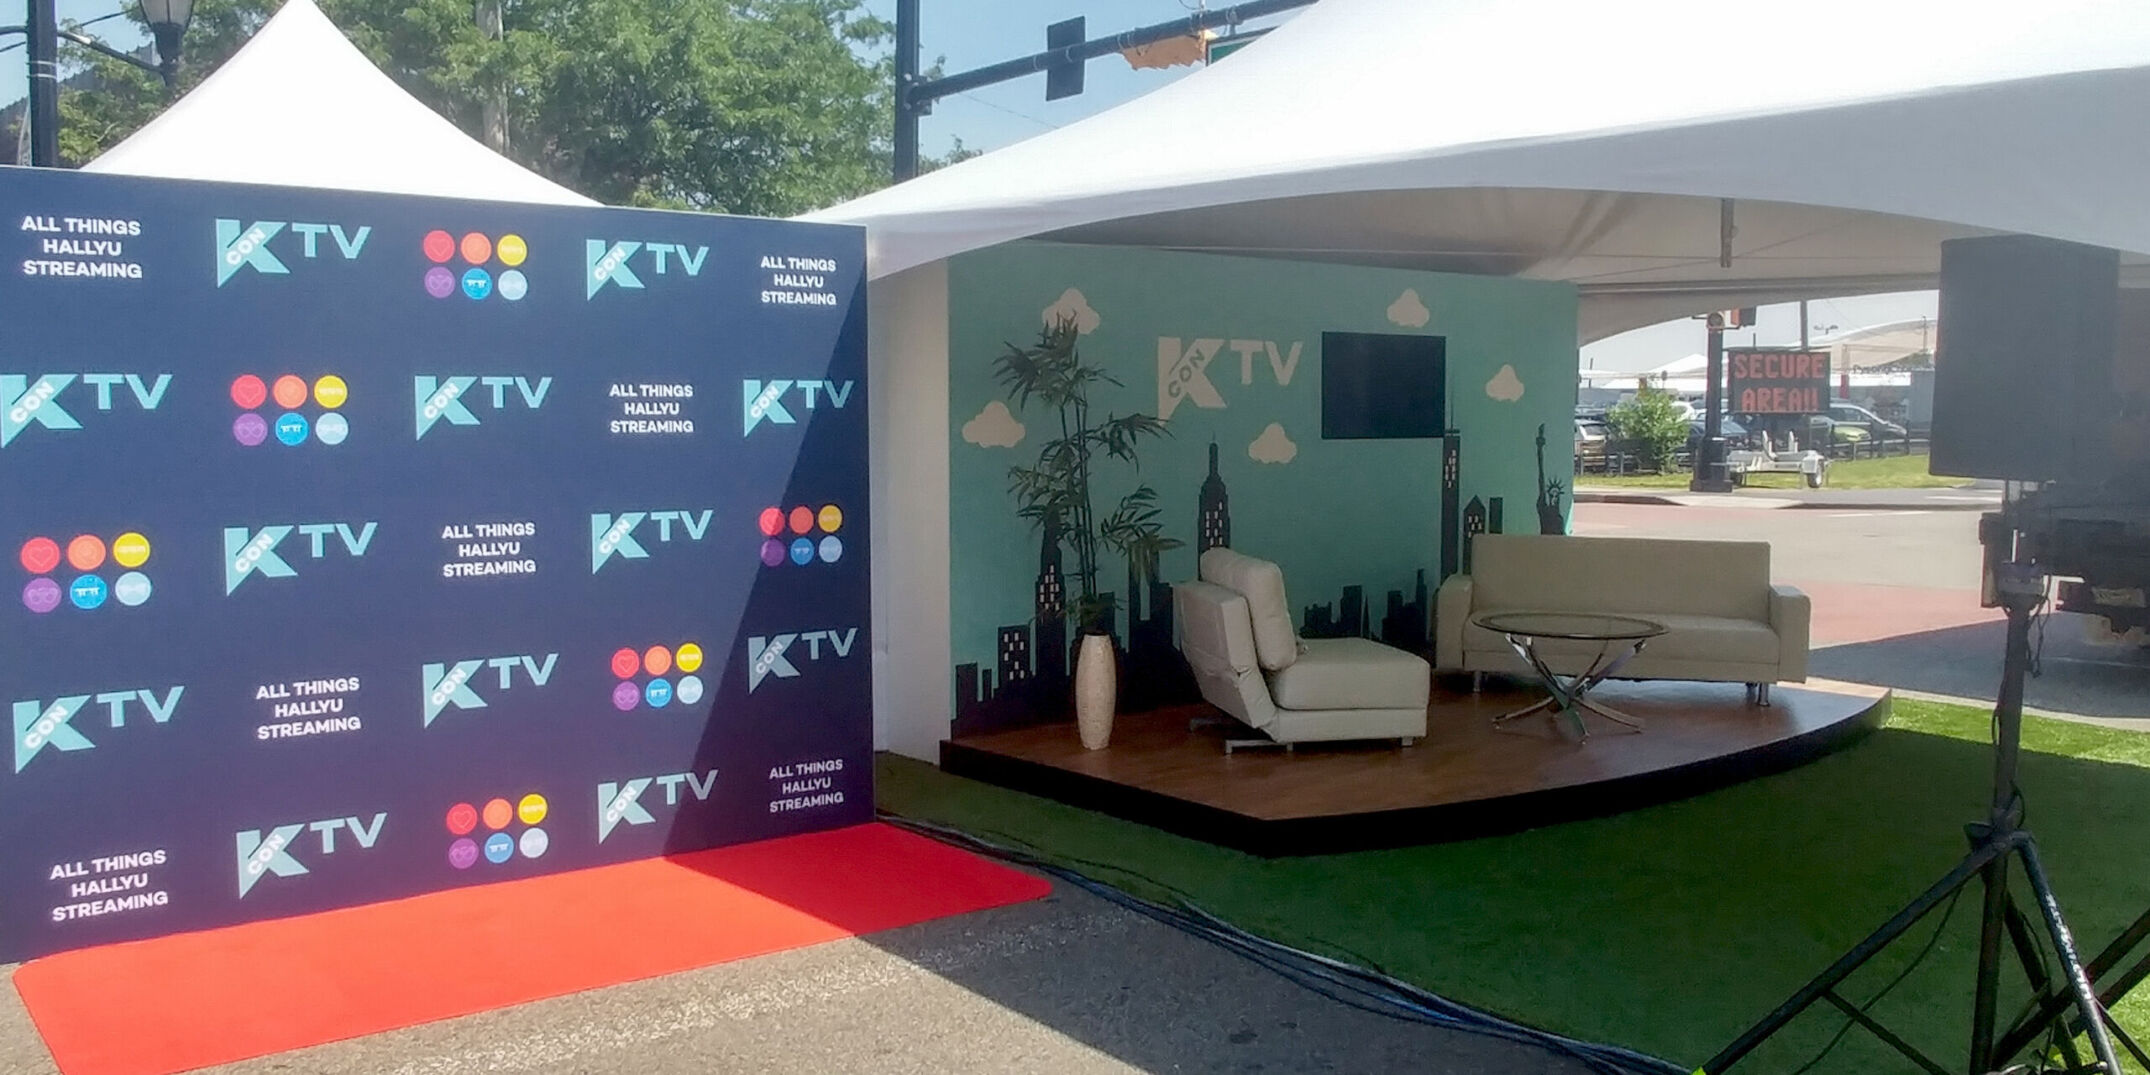 Outdoor TV set stage for Kcon inside tent with graphic wall for intros